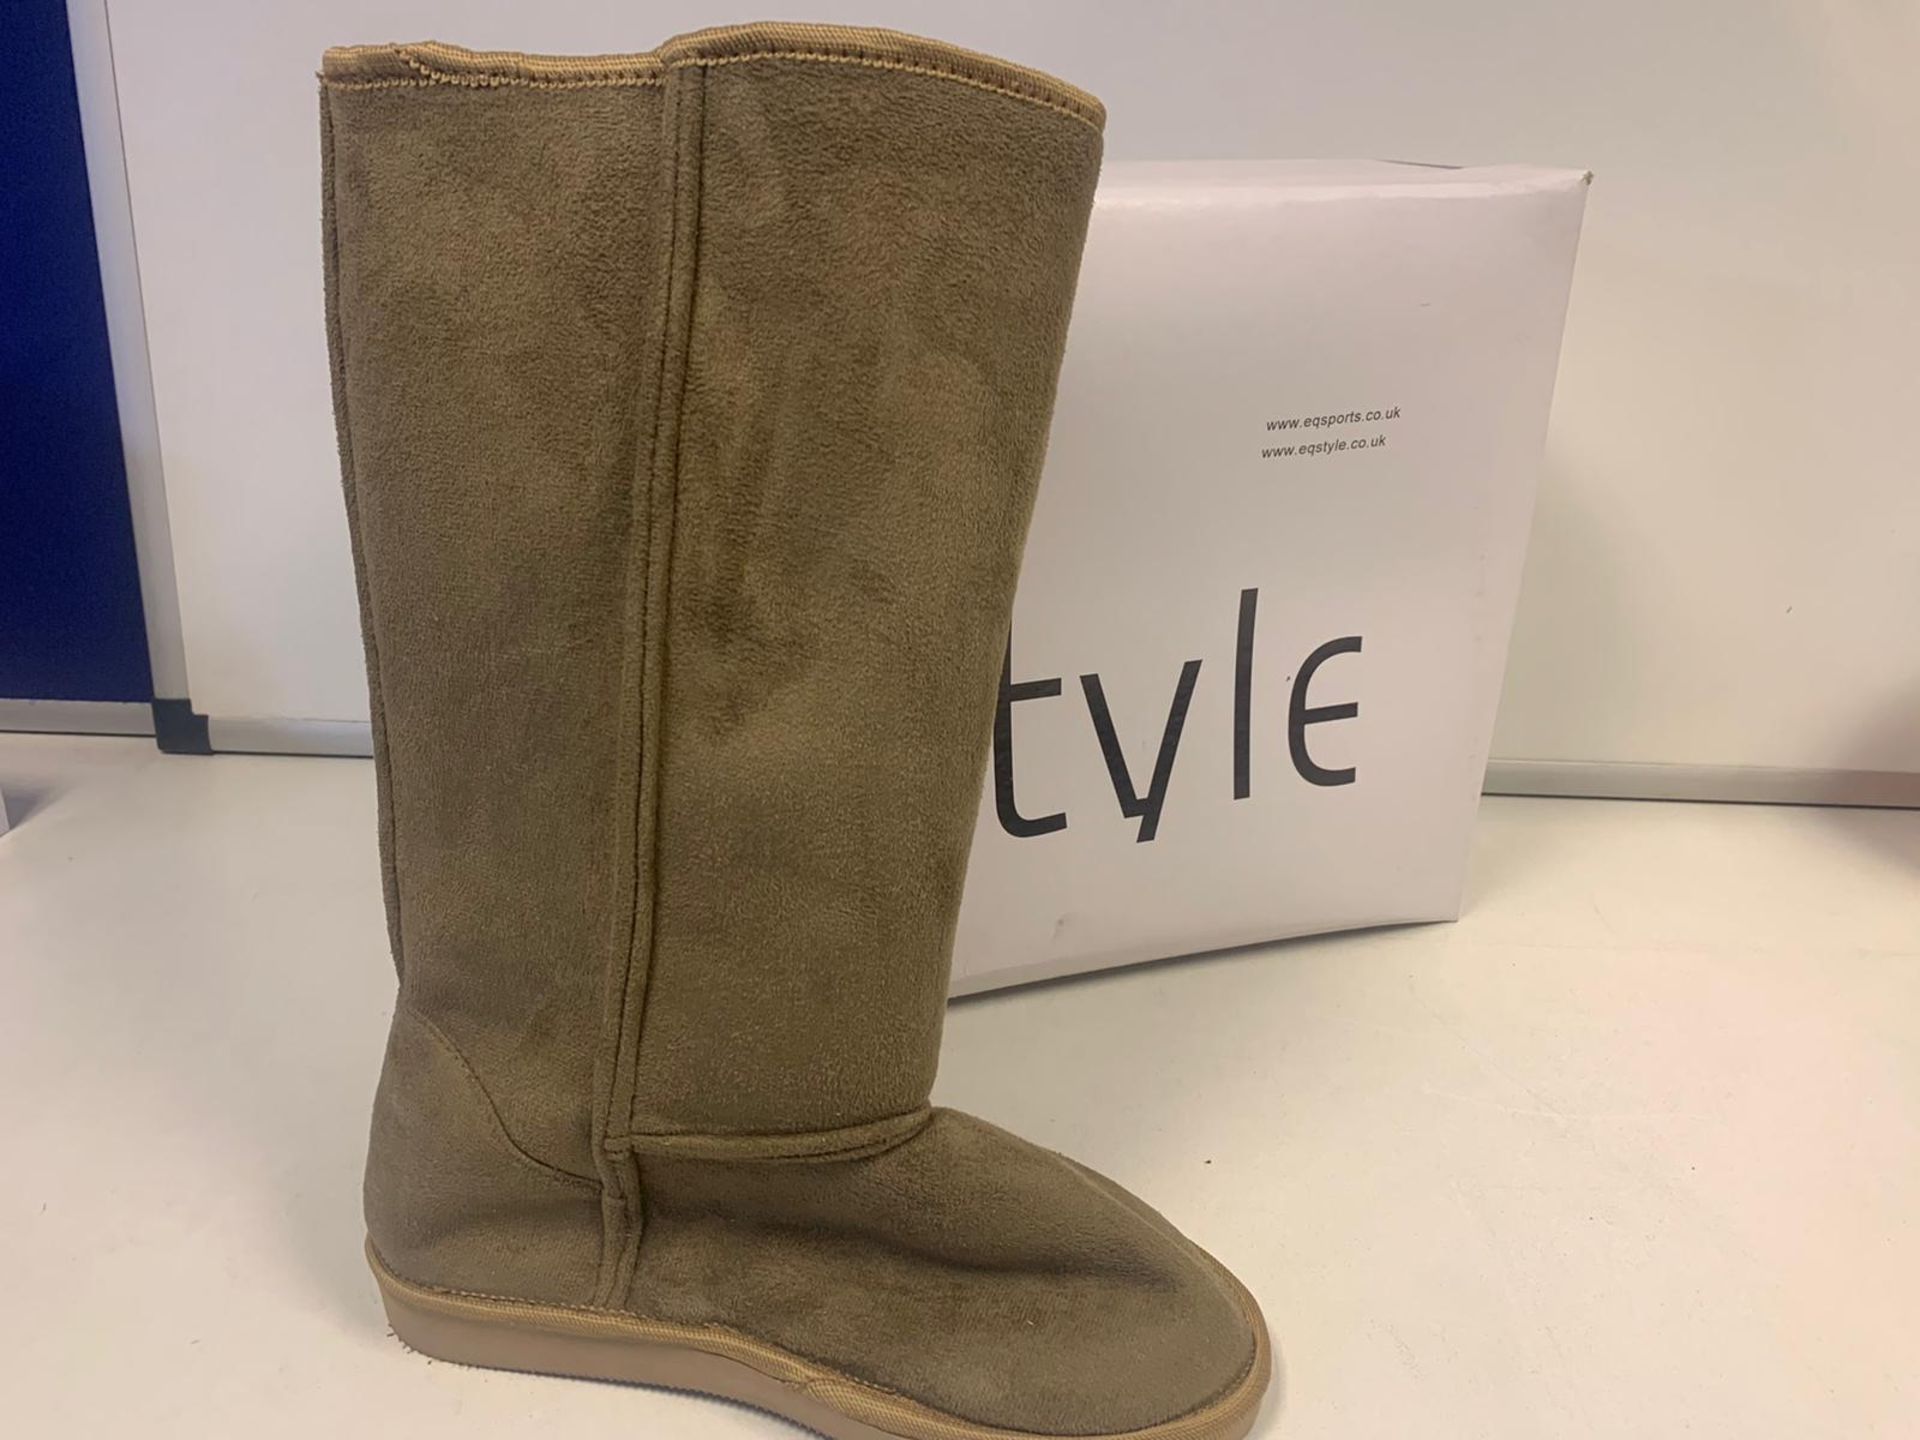 20 X BRAND NEW BOXED EQ STYLE WINTER BOOTS CAMEL SIZE 3 IN 2 BOXES